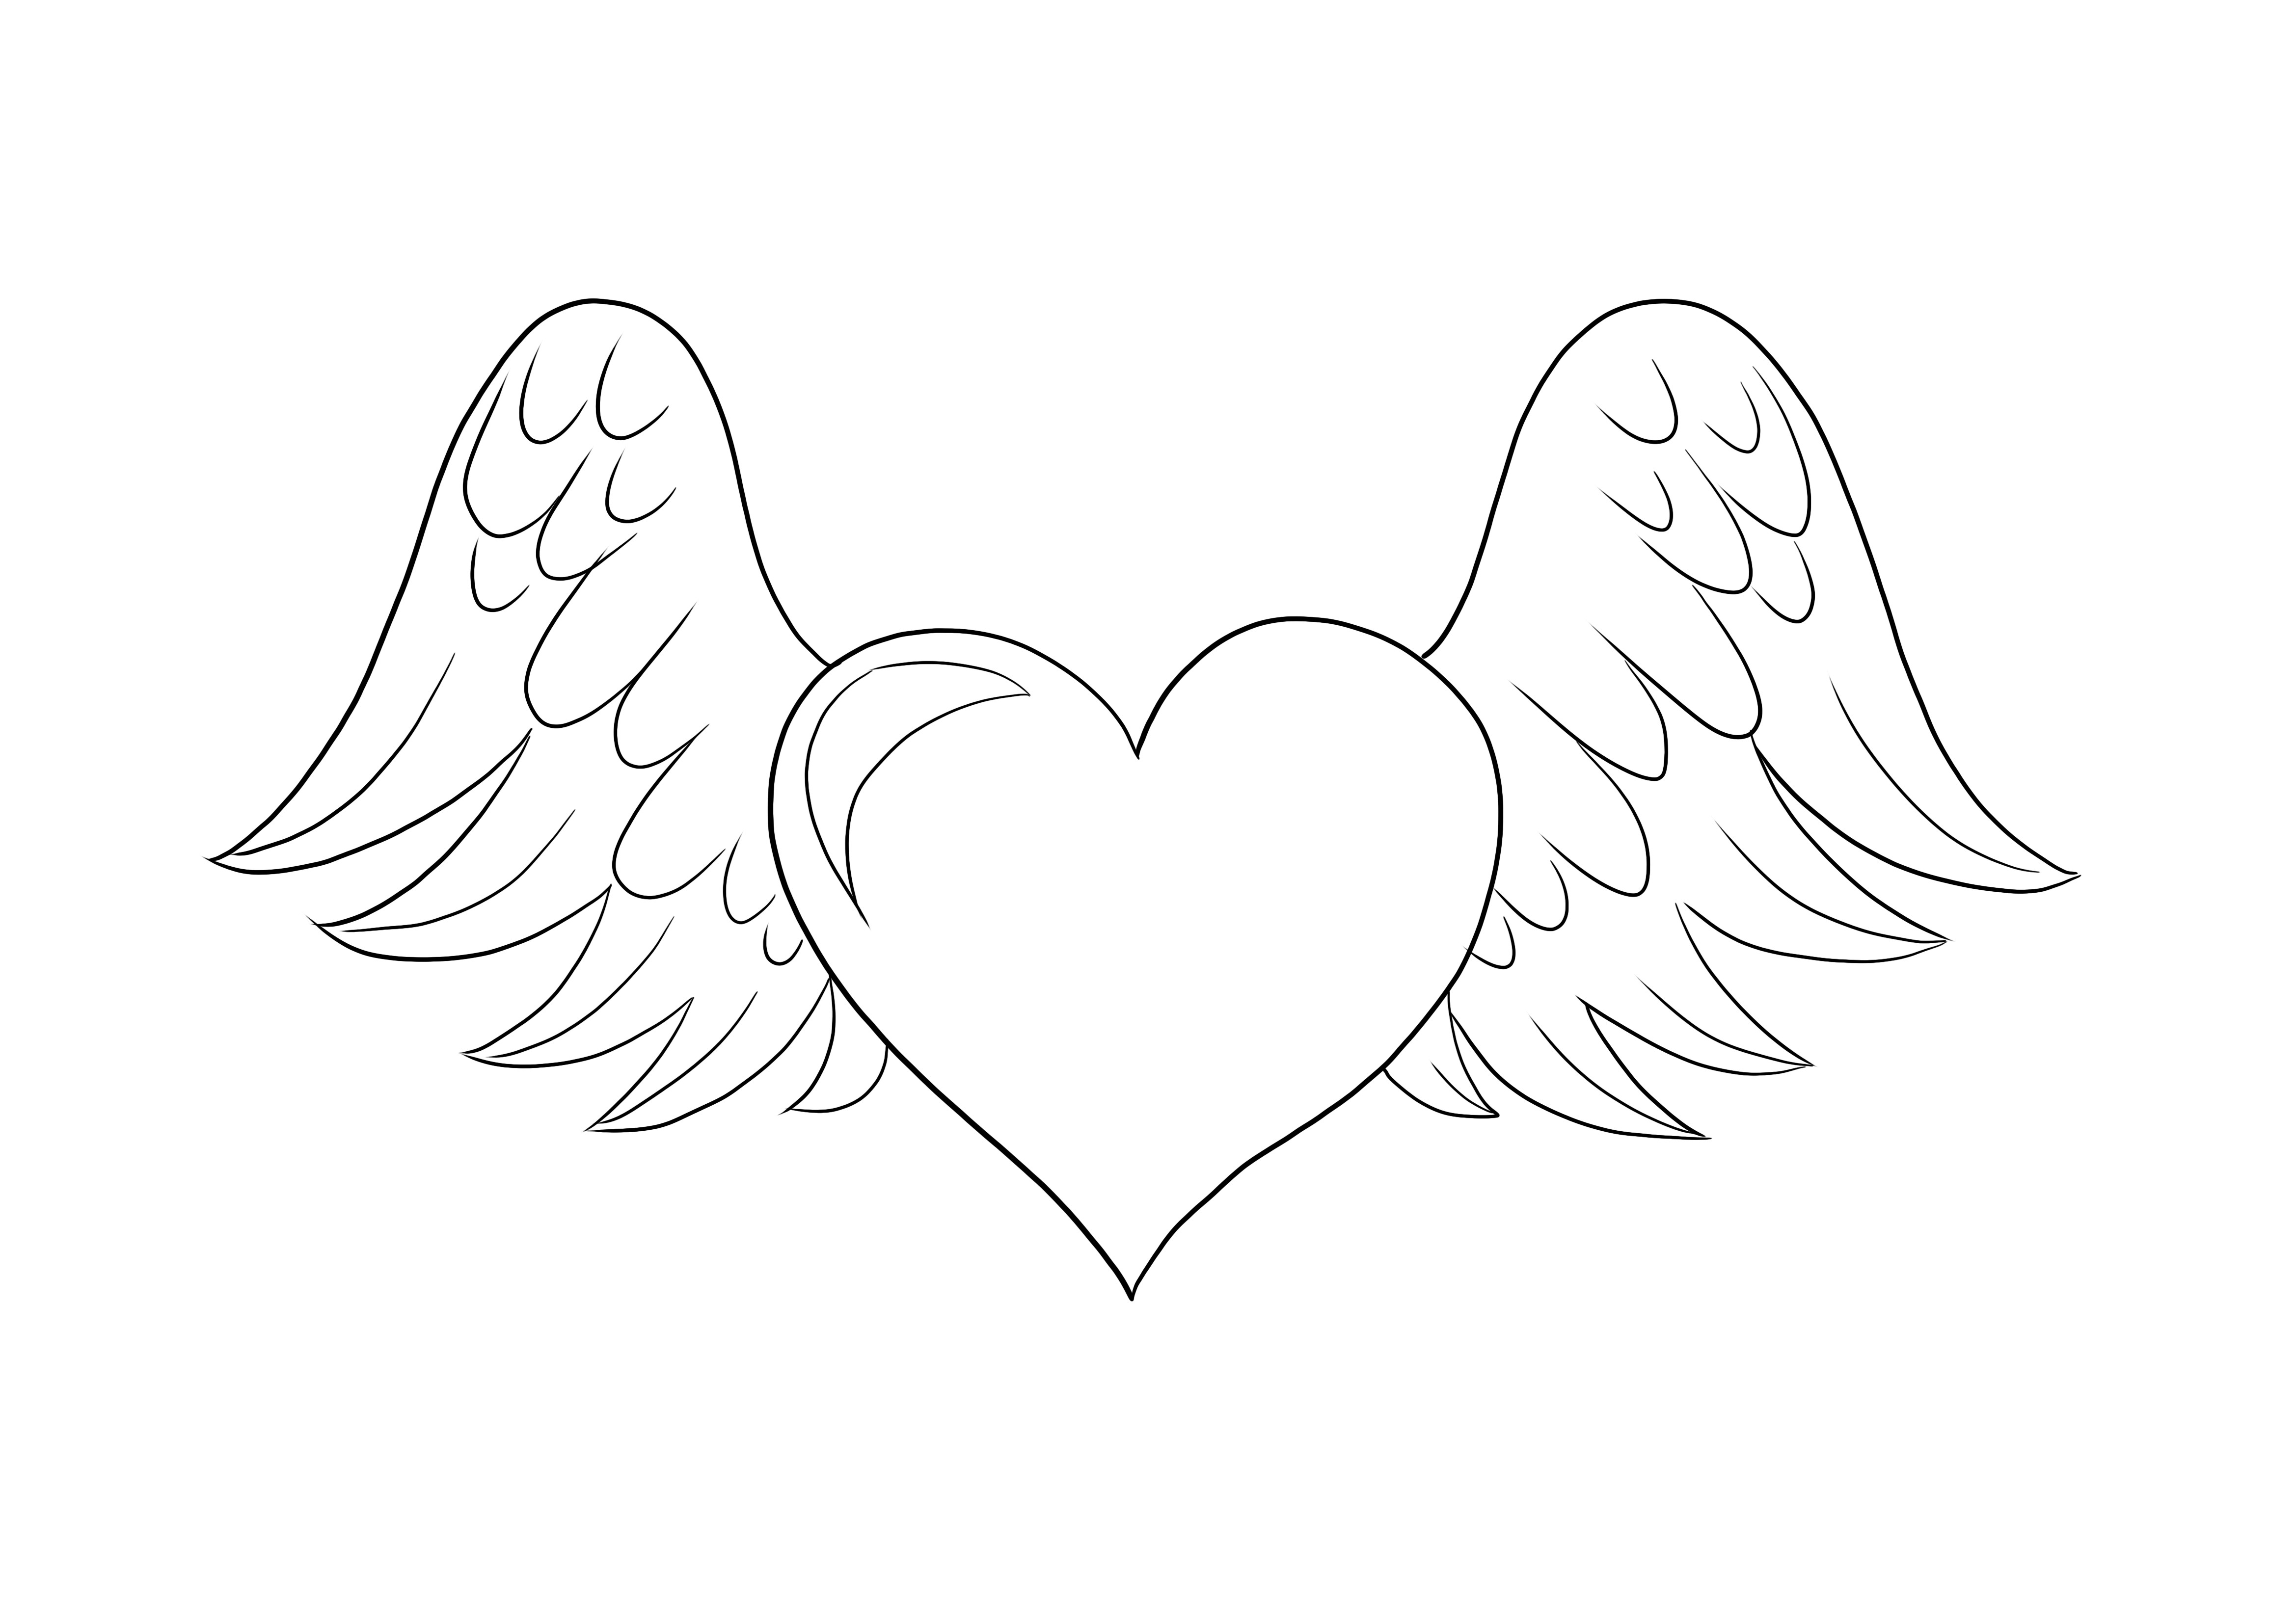 Heart with wings coloring image for kids for free downloading